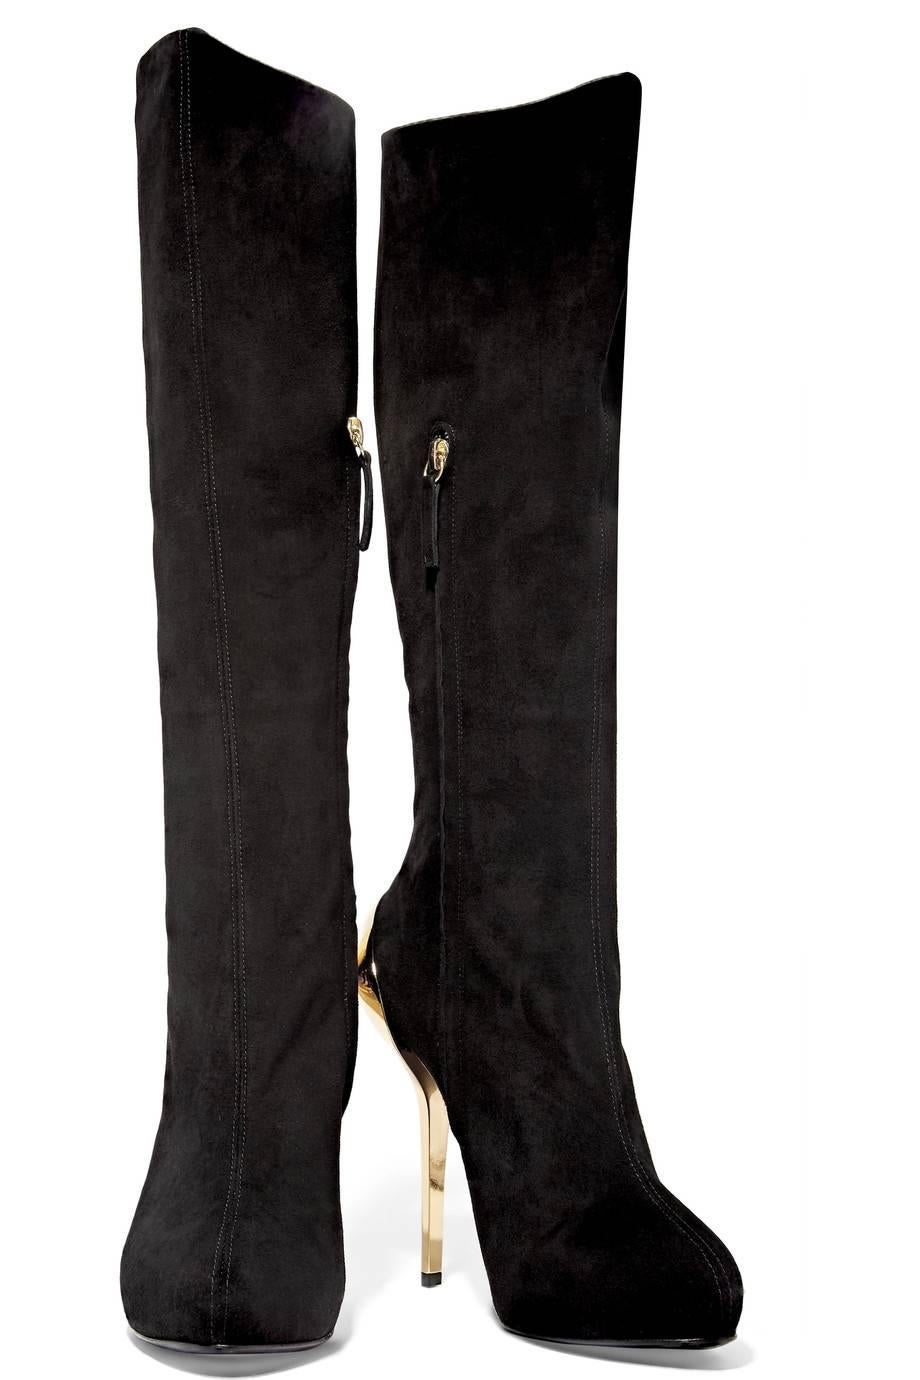 CURATOR'S NOTES

Giuseppe Zanotti NEW & SOLD OUT Black Suede Gold Metal Knee High Boots in Box  

Size IT 40 
Suede
Gold tone metal
Zipper closure
Heel height 5.5"
Includes original Giuseppe Zanotti box